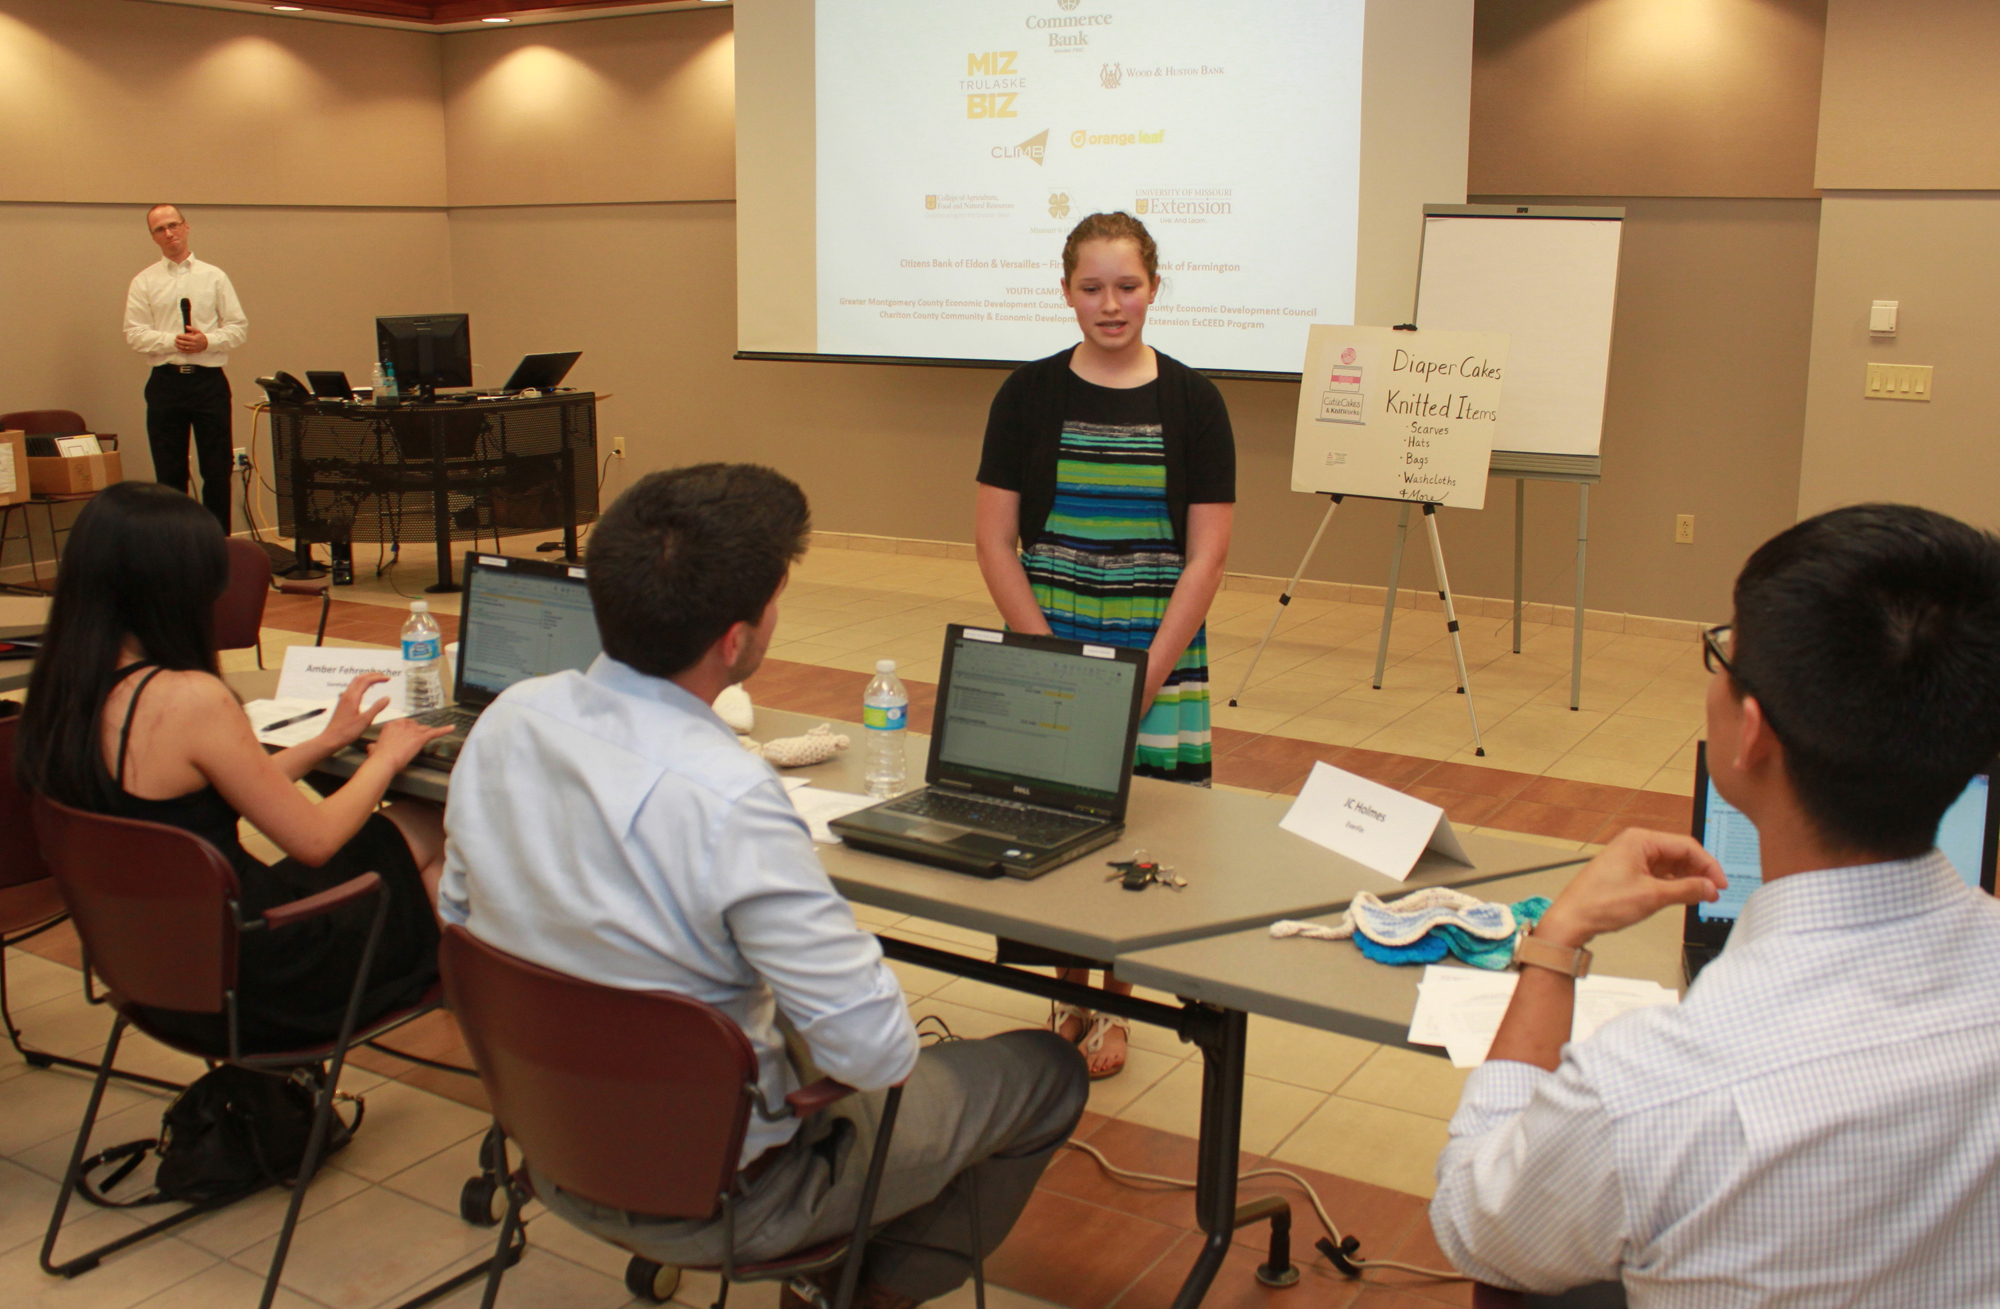 Rebekah Kempker, standing, explains her business concept to a panel of judges at the closing session of 4-H Build-A-Business camp. The session offered campers a forum for pitching their entrepreneurial ideas to actual business owners.